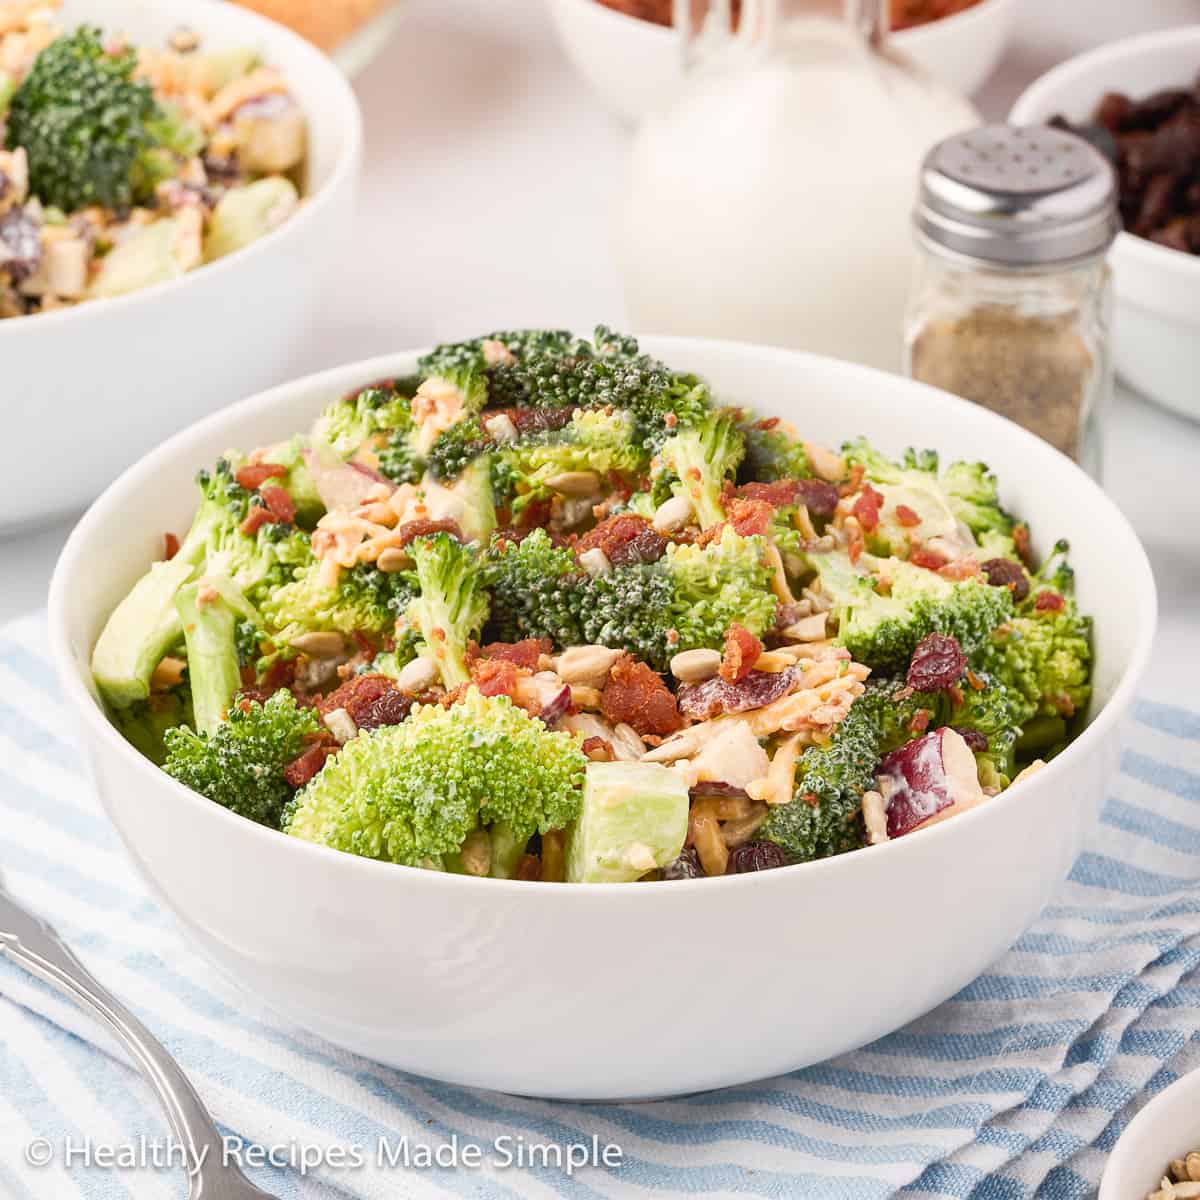 Broccoli salad in a white bowl on a blue and white striped towel.